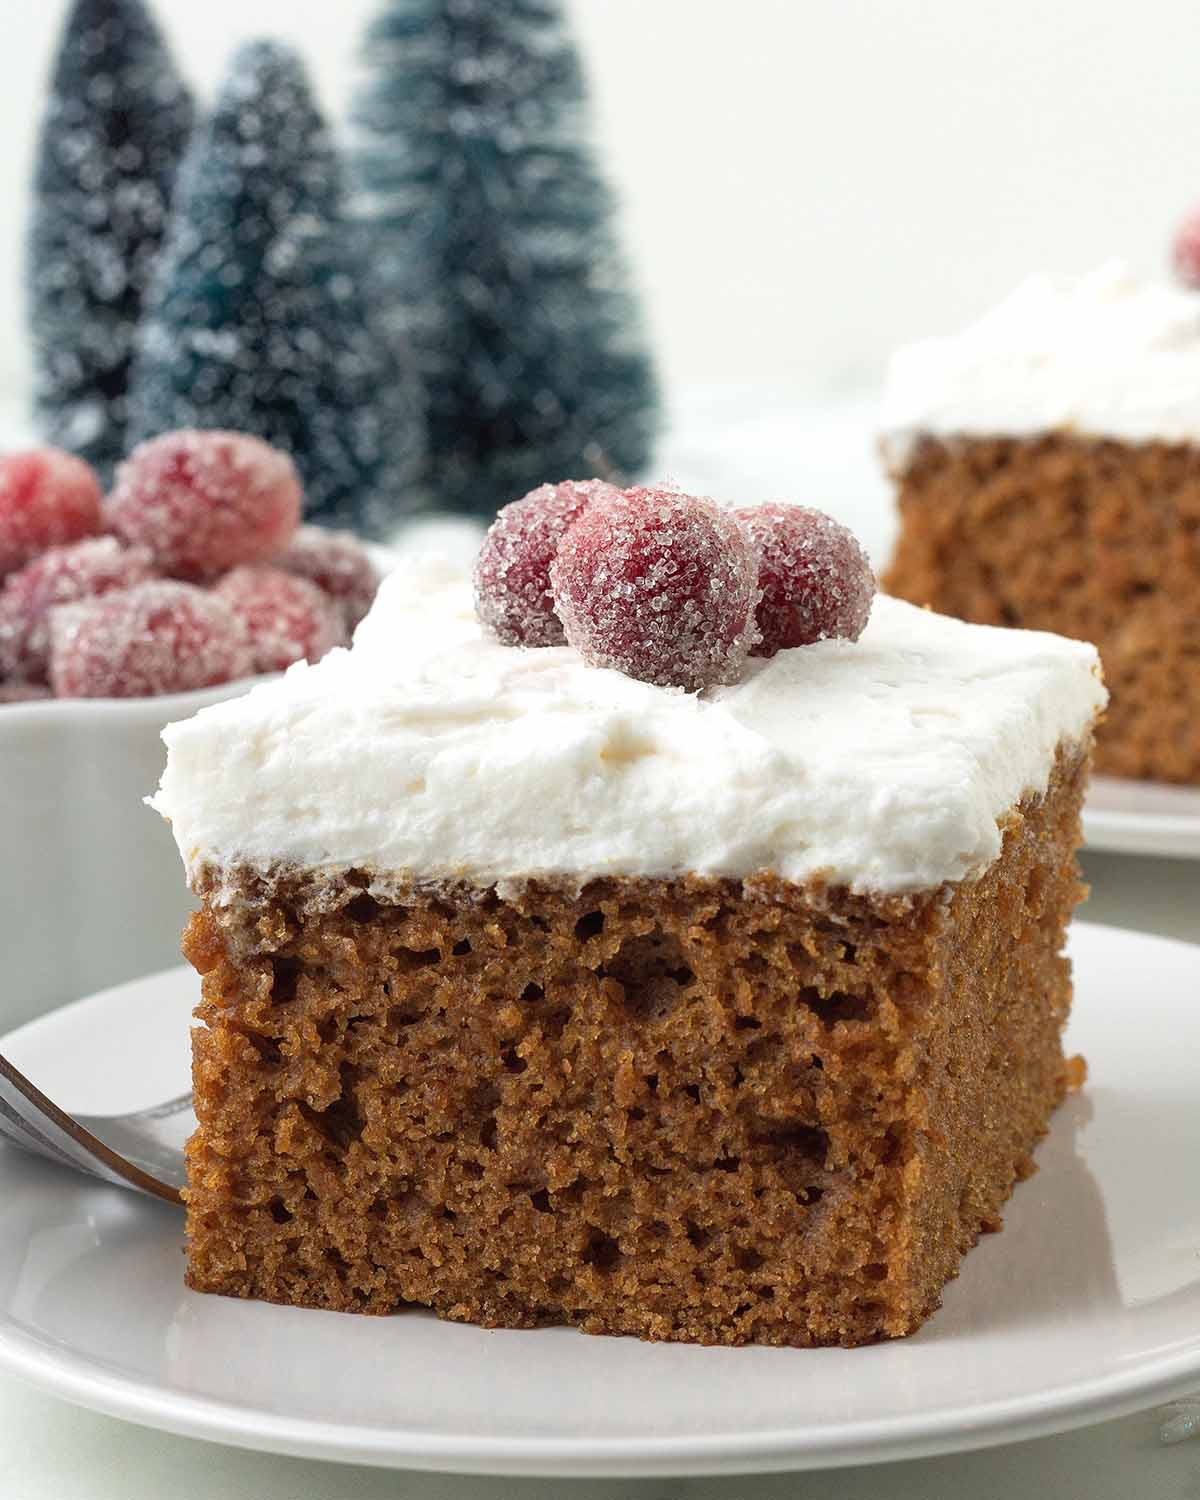 A square of vegan gingerbread cake on a plate, the cake is topped with frosting and sugared cranberries.